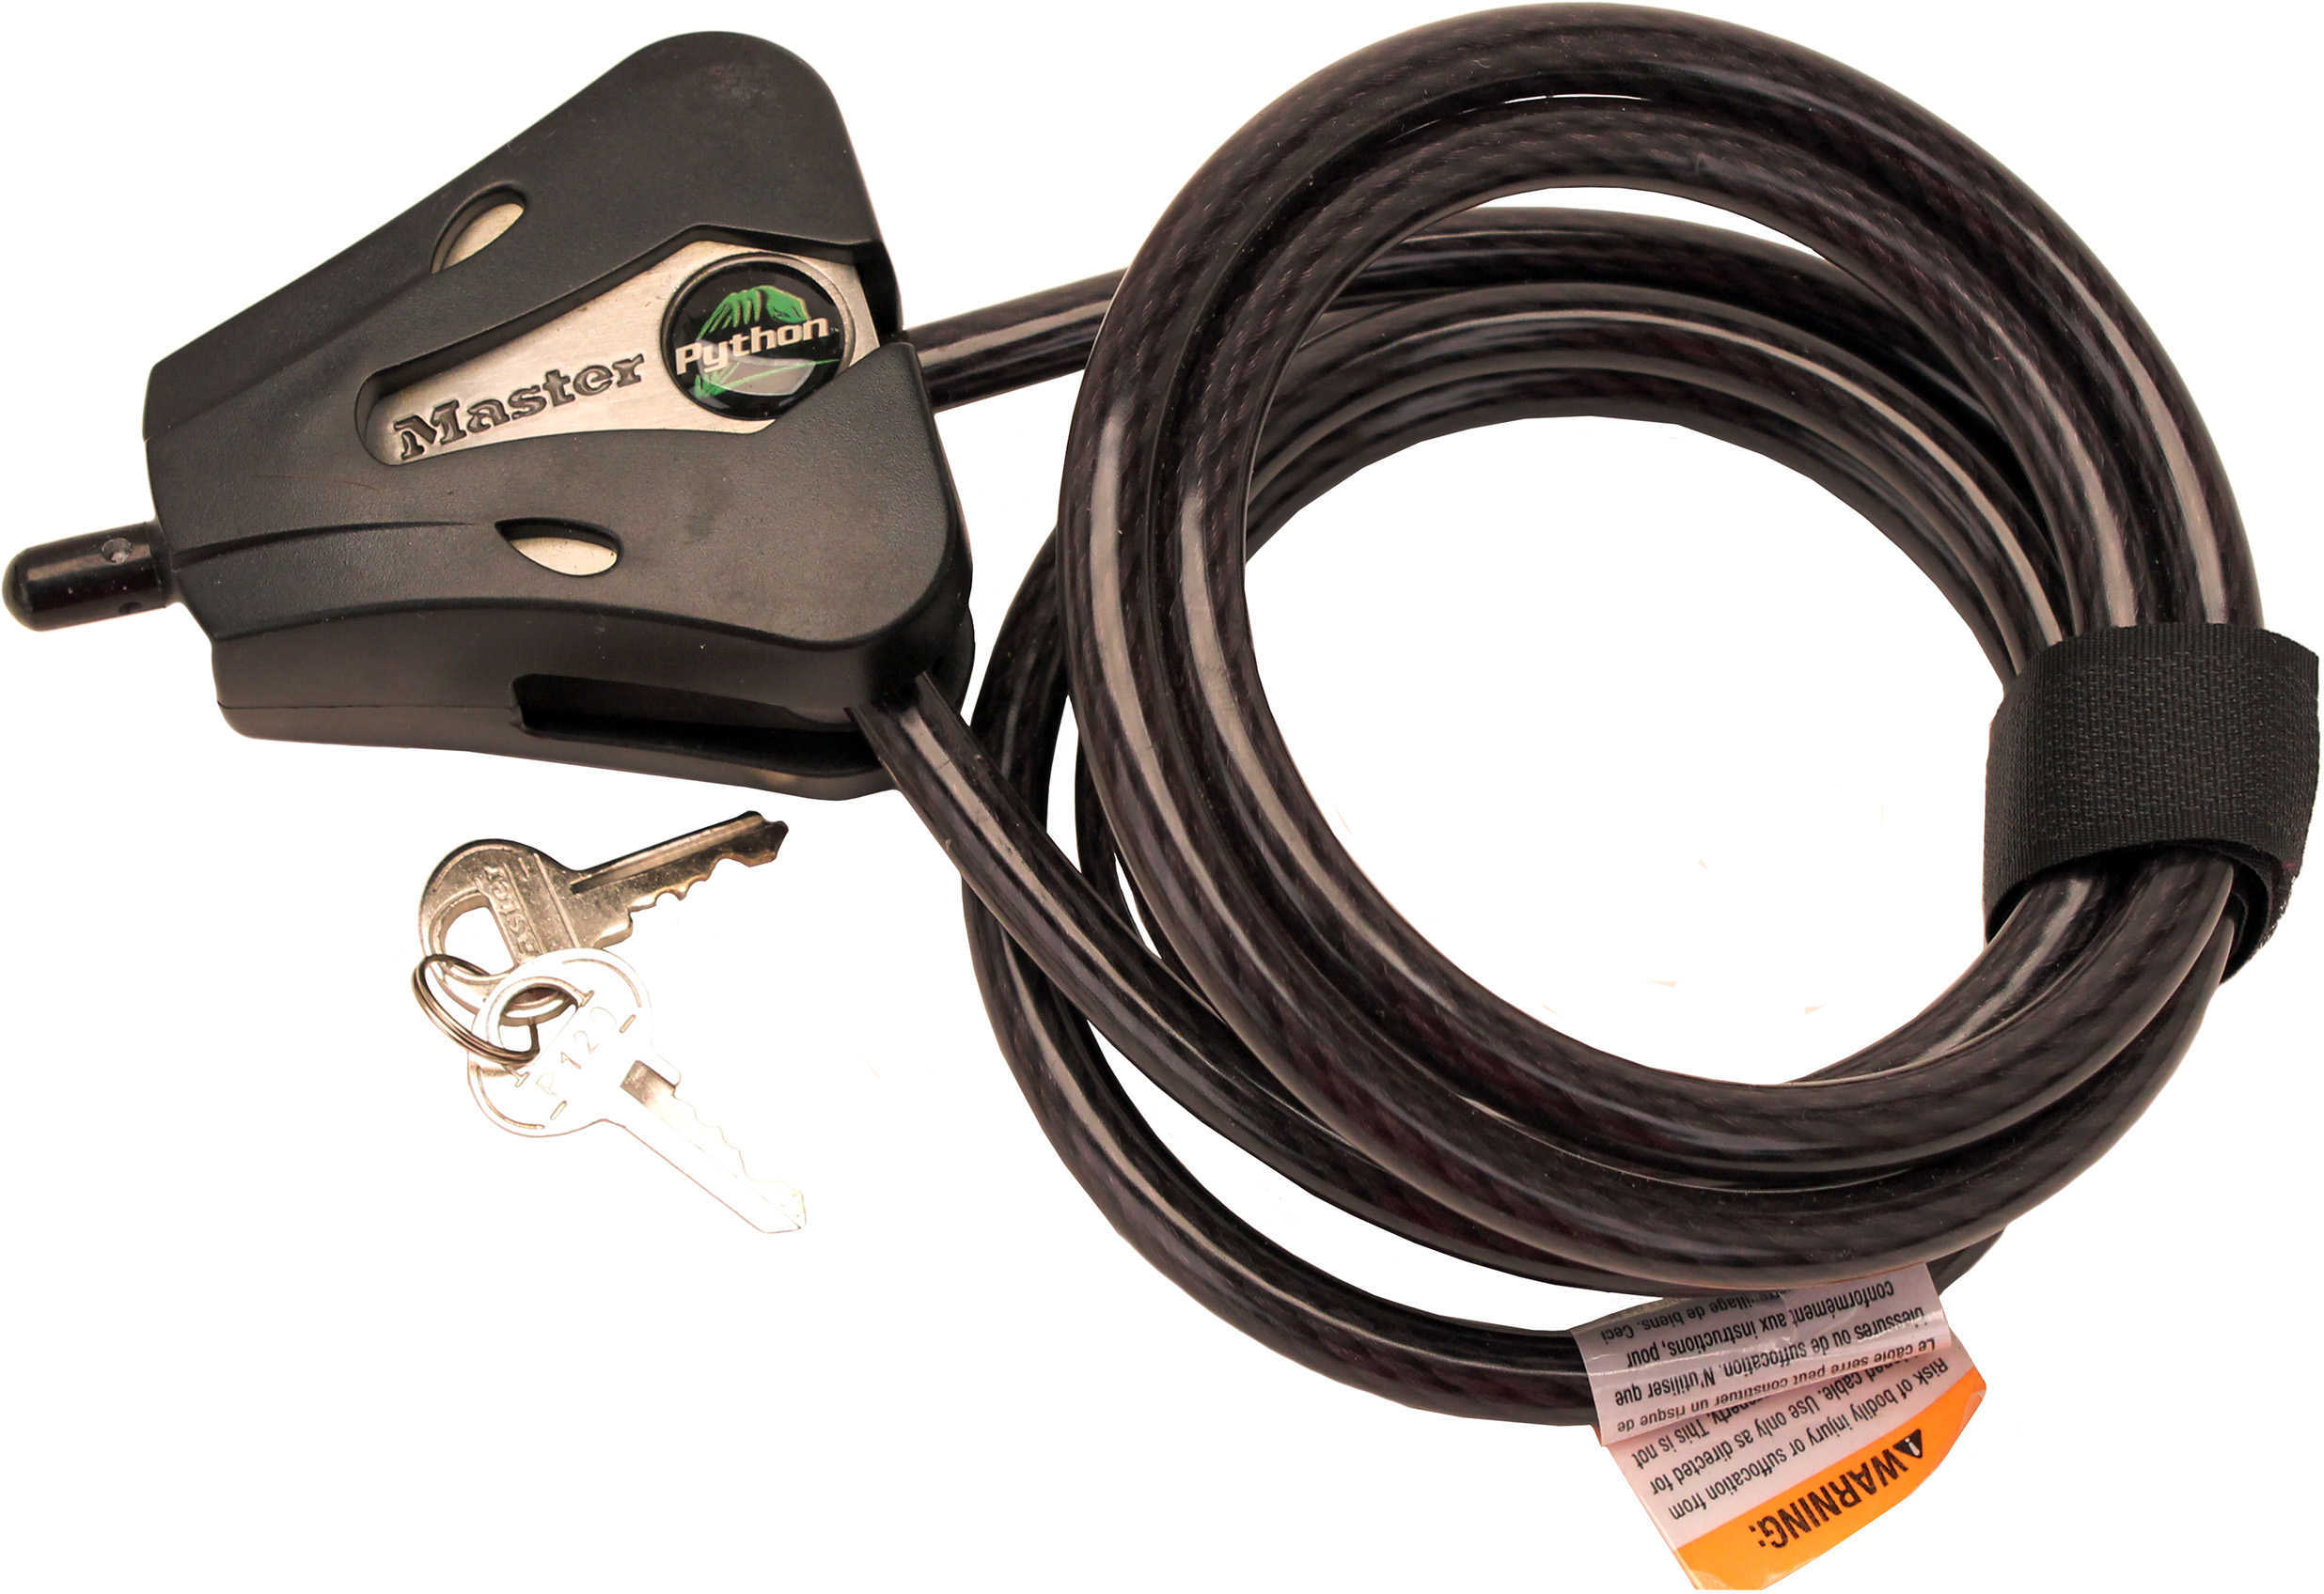 Bushnell Cable Lock Black Adjustable, Clam Md: 119518C